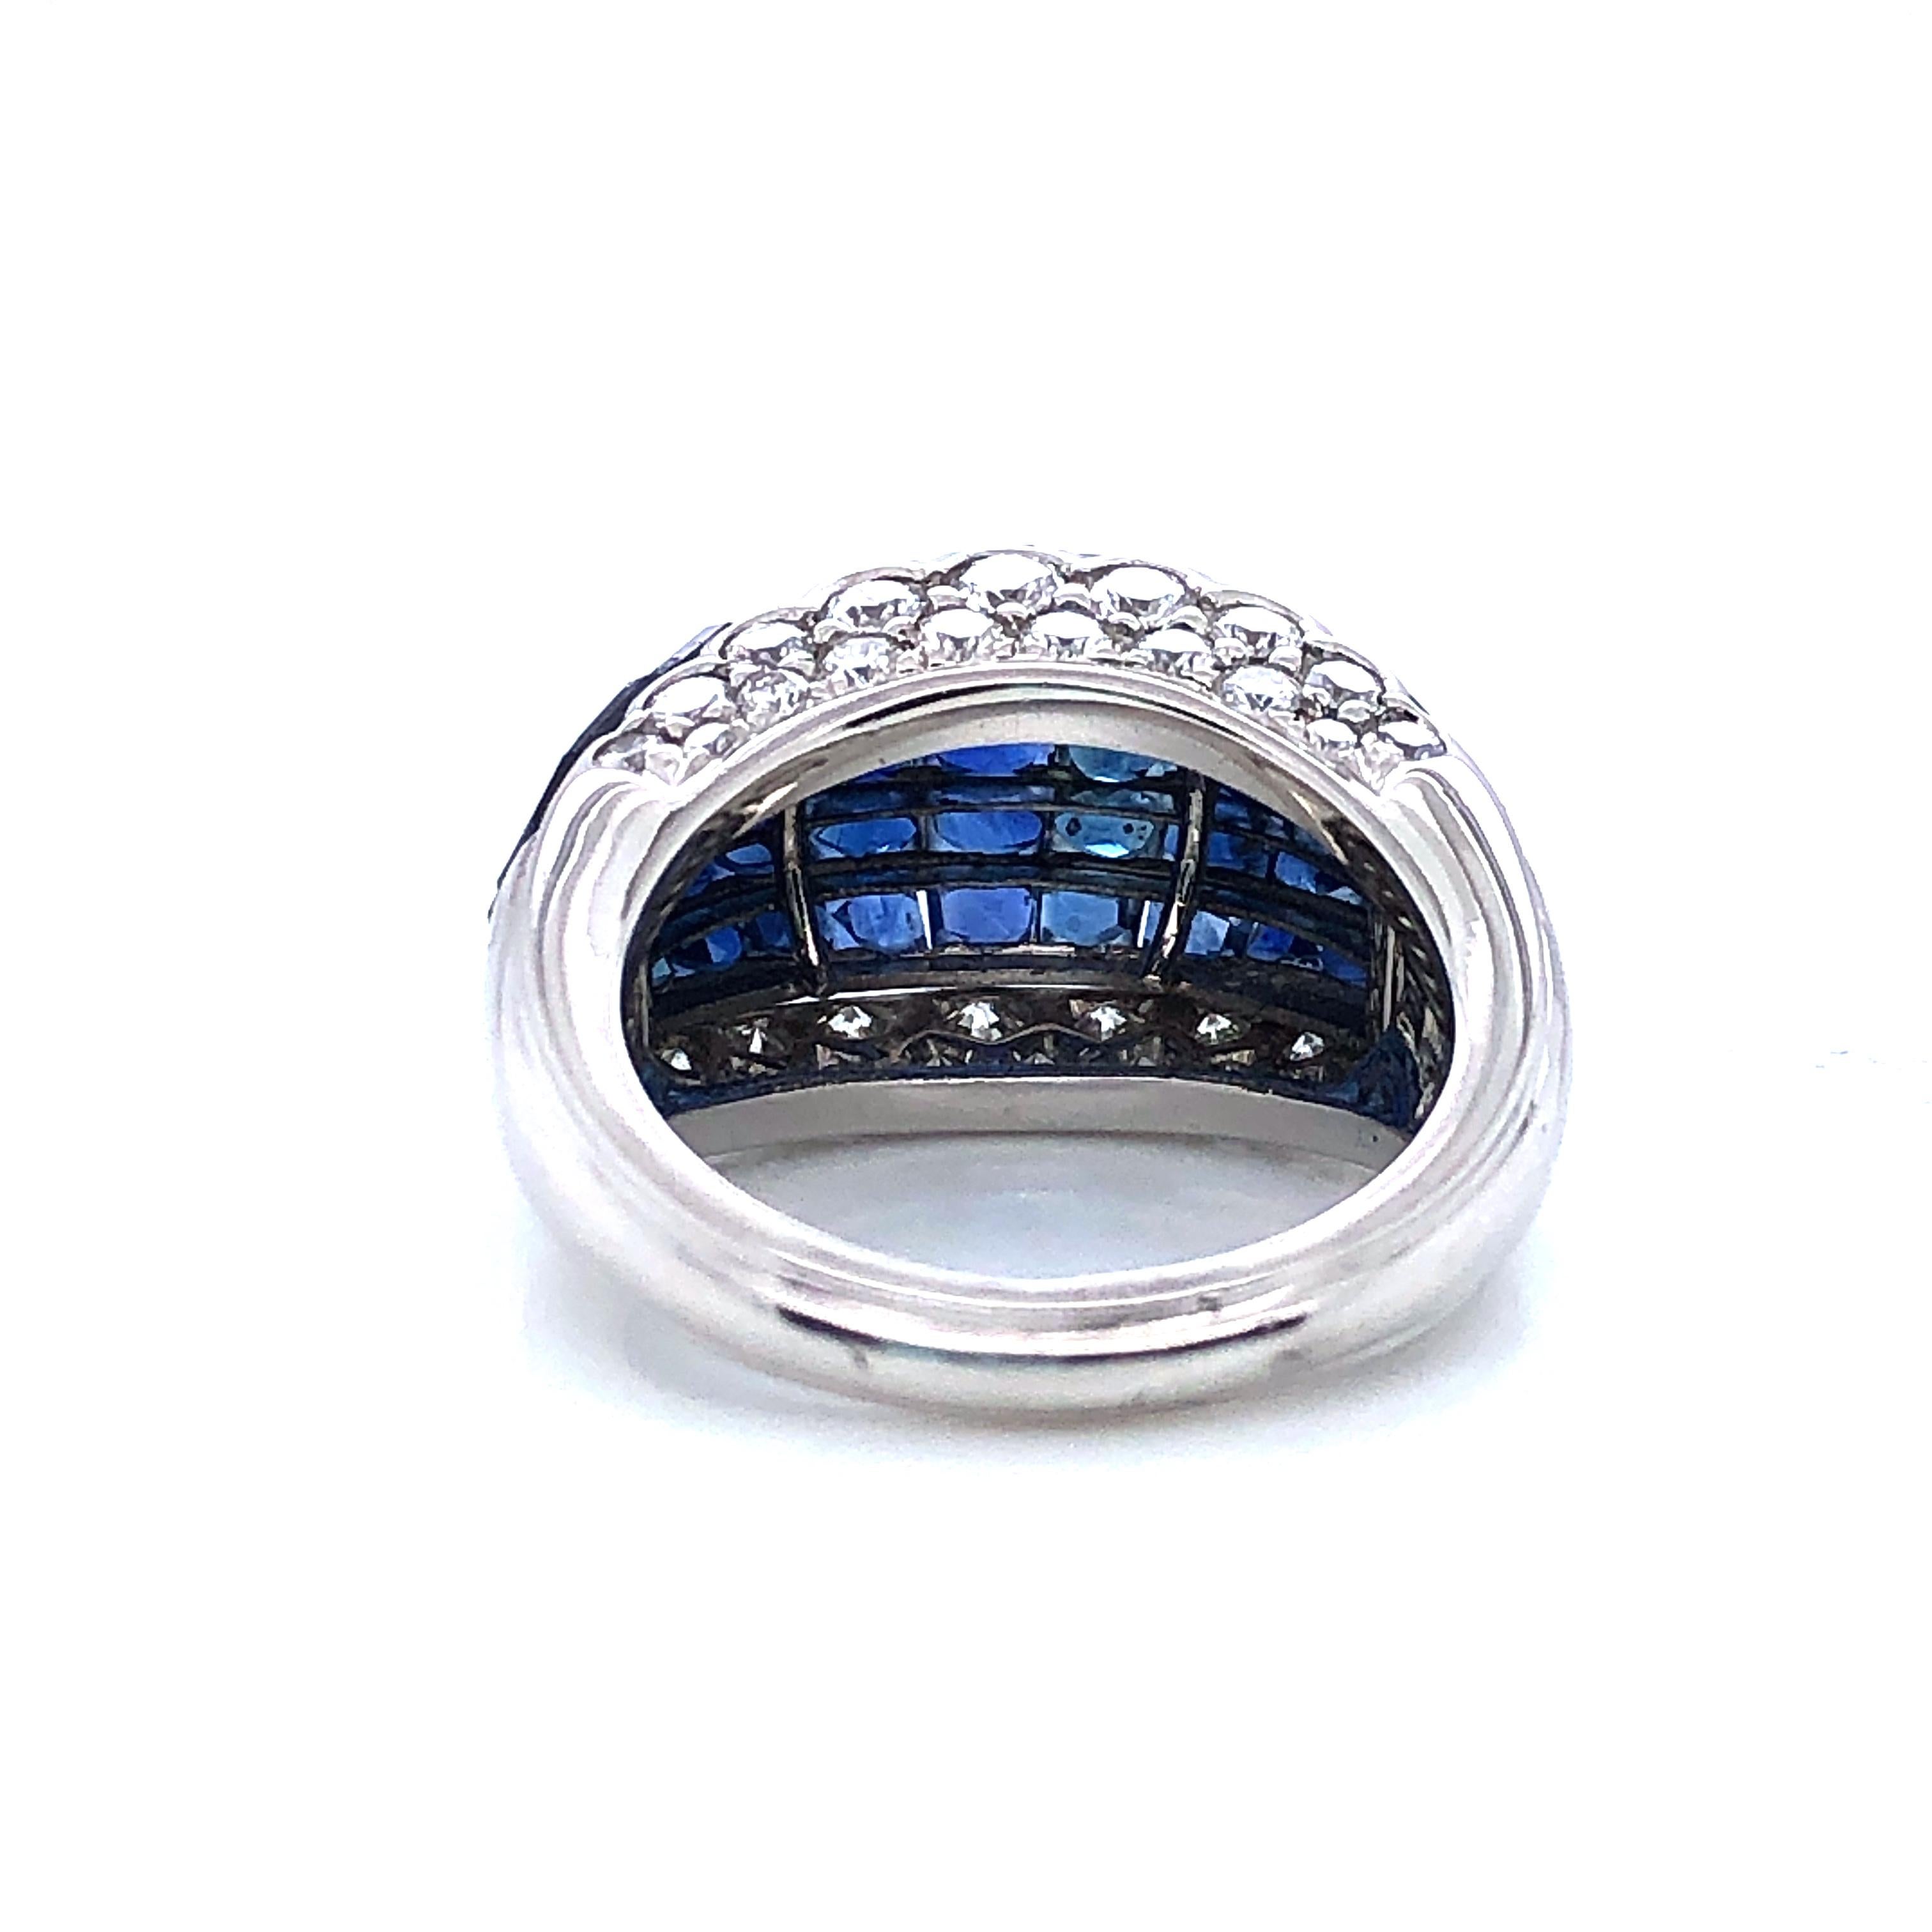 Women's or Men's Oscar Heyman Platinum Invisibly Set Sapphire Bombe Ring For Sale